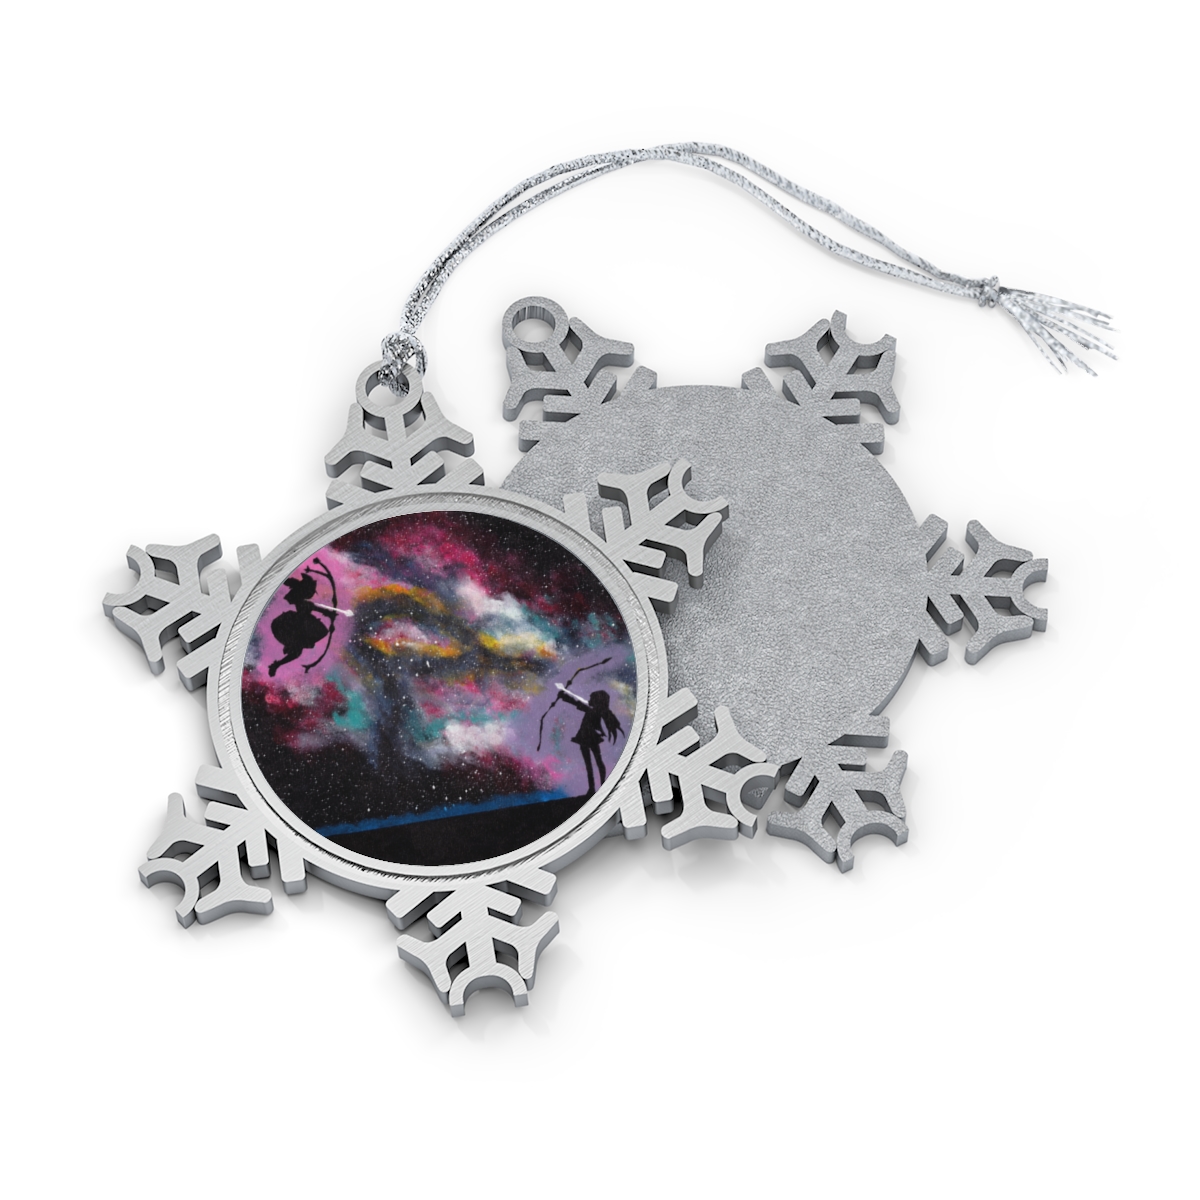 Pewter Snowflake Ornament - The Space Between Our Ideals